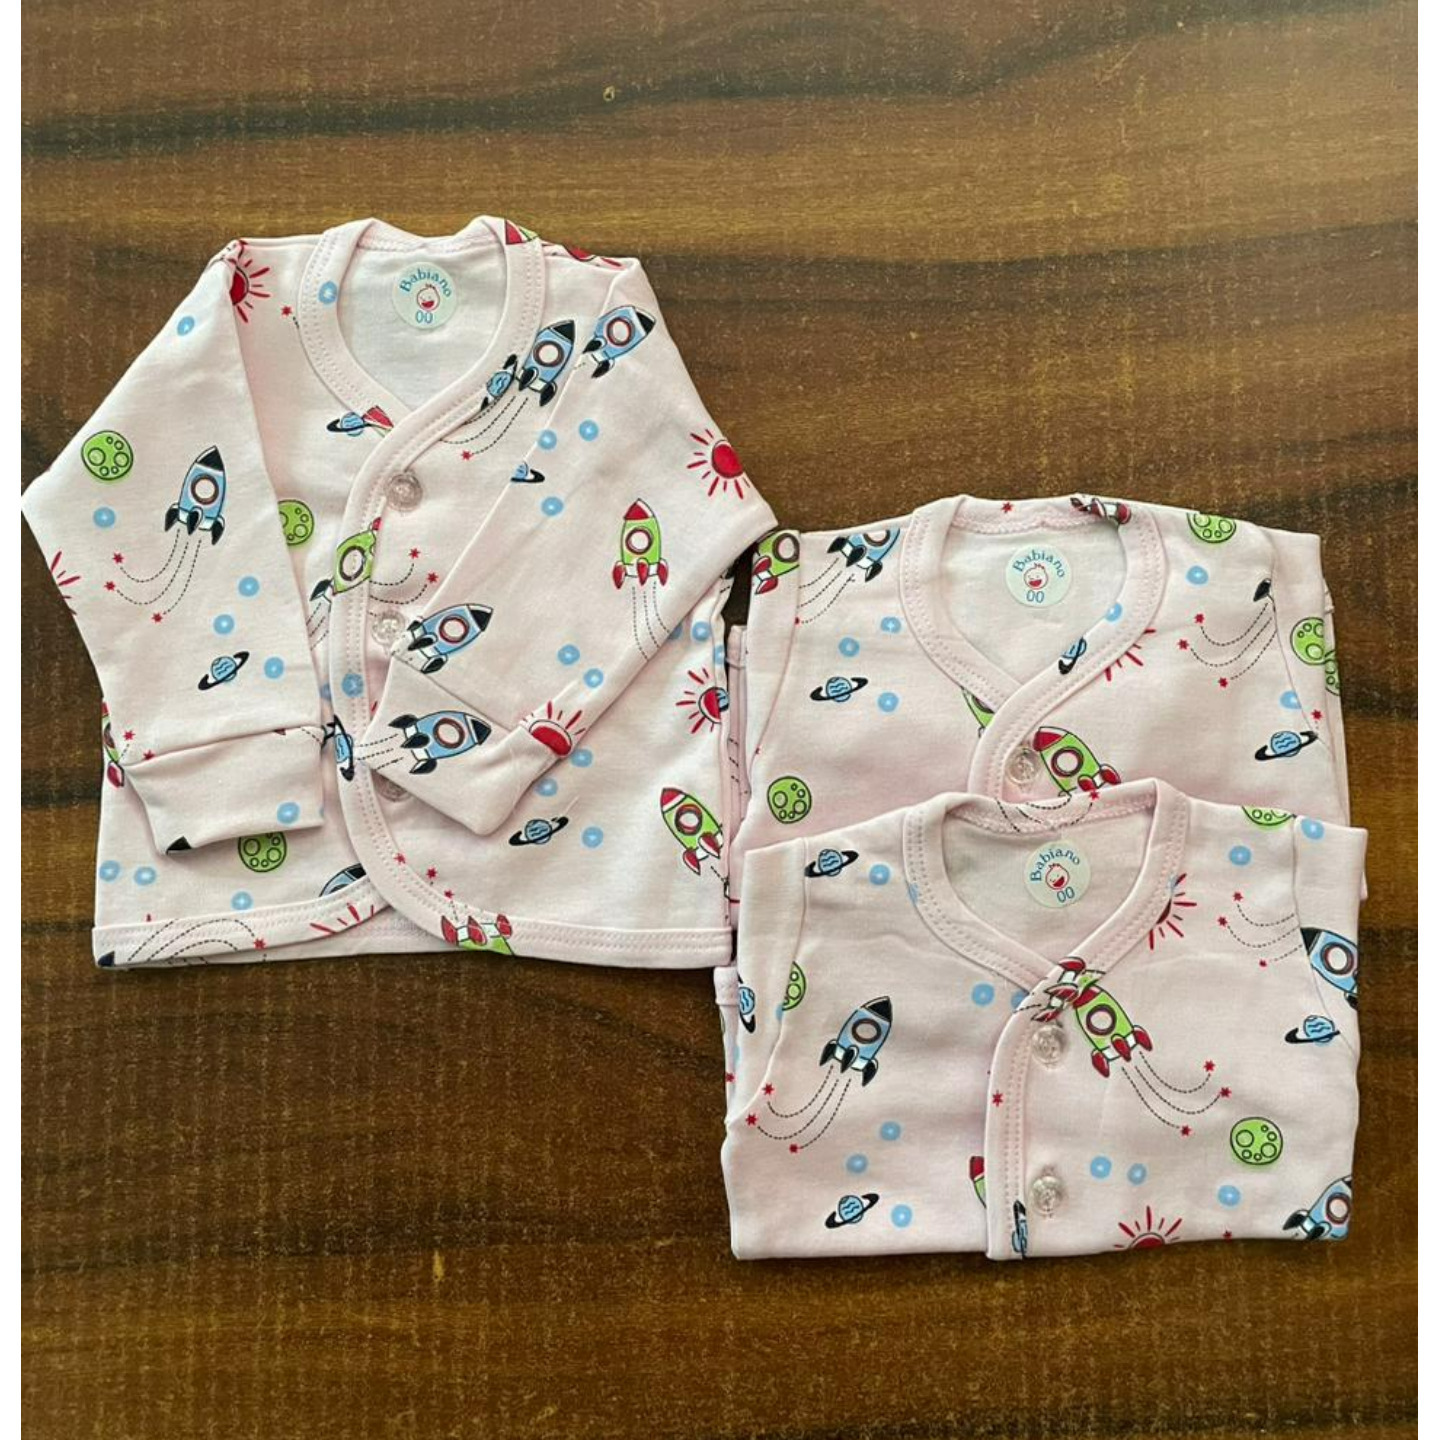 Babiano Full Sleeves Set Rs 430 Only Pre Mature Size Newborn Premie PAck of 3